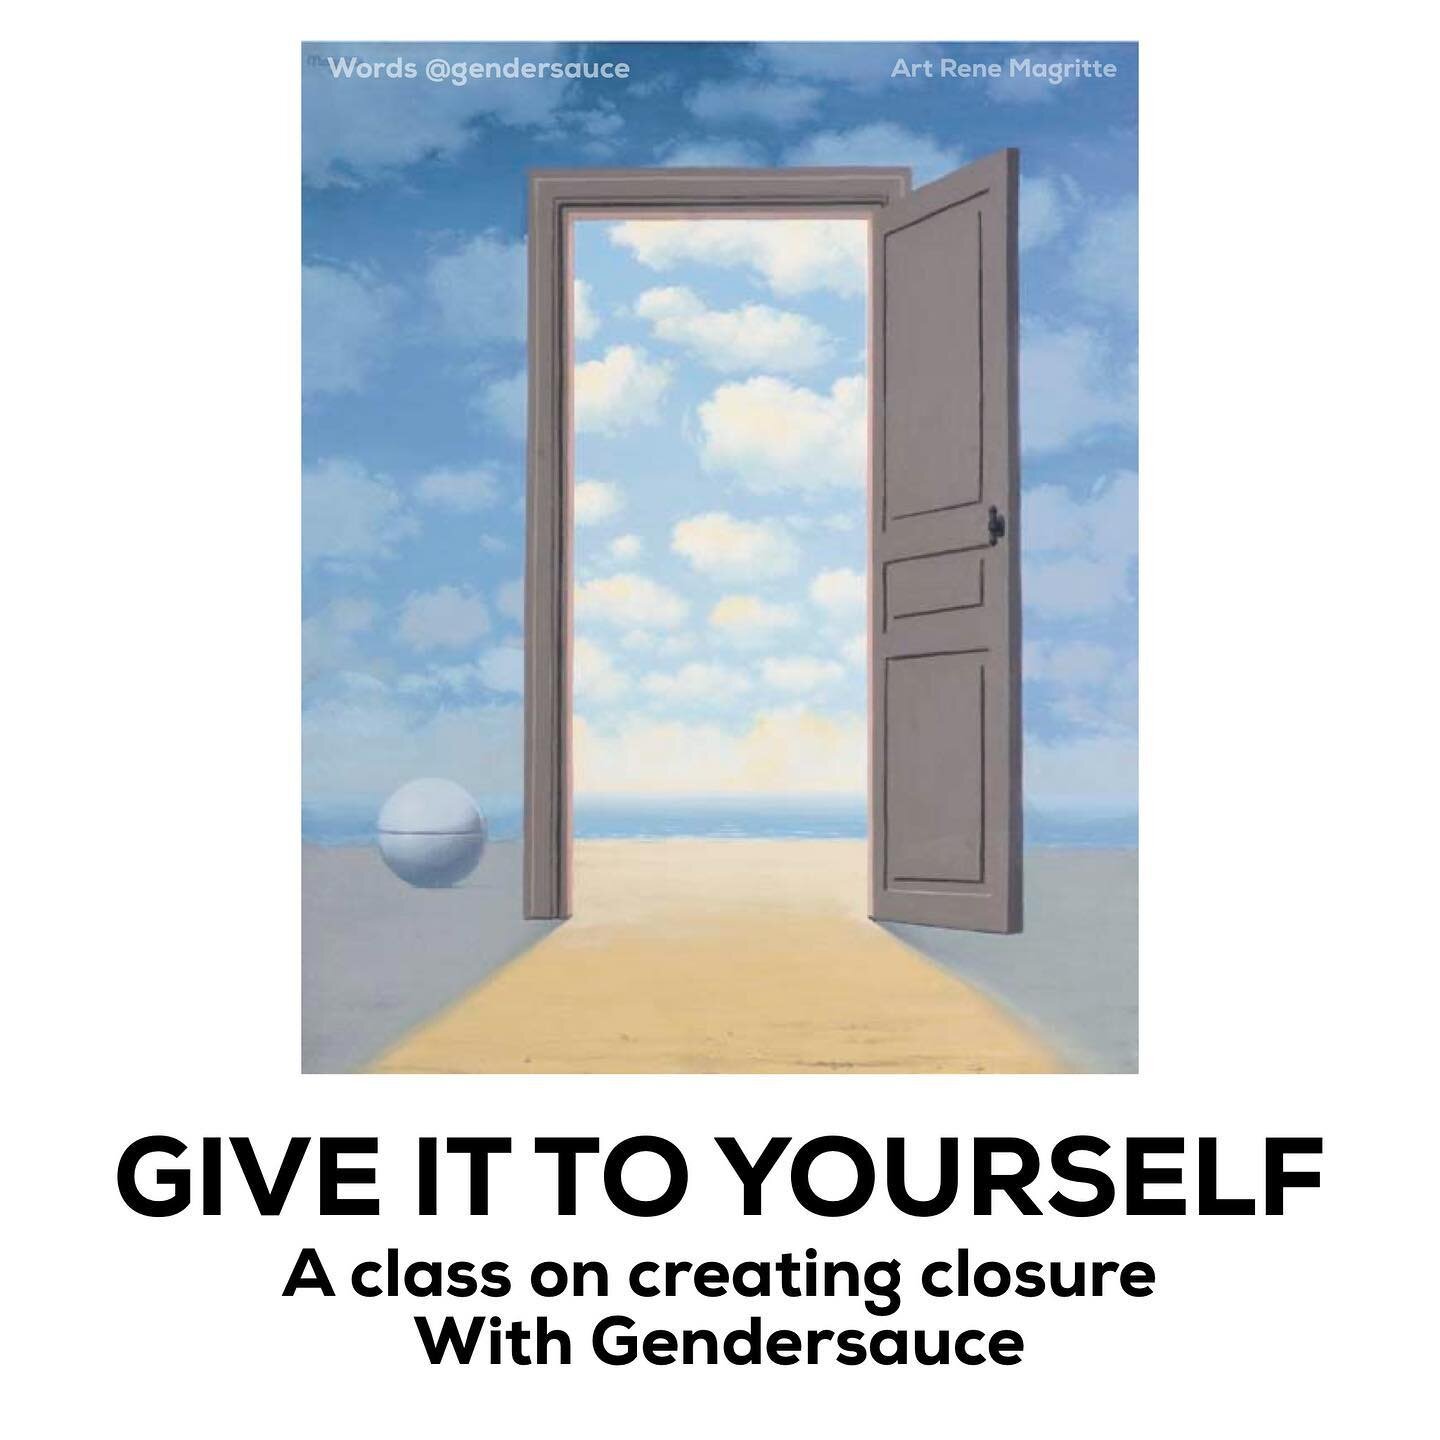 This class has been wildly popular, so I&rsquo;m offering it after some requests to take it again. I hope to see you there. ❤️ #CuspyWholesomeMemes Art by Magritte. Image description will be pinned in the comments as soon as it&rsquo;s complete.